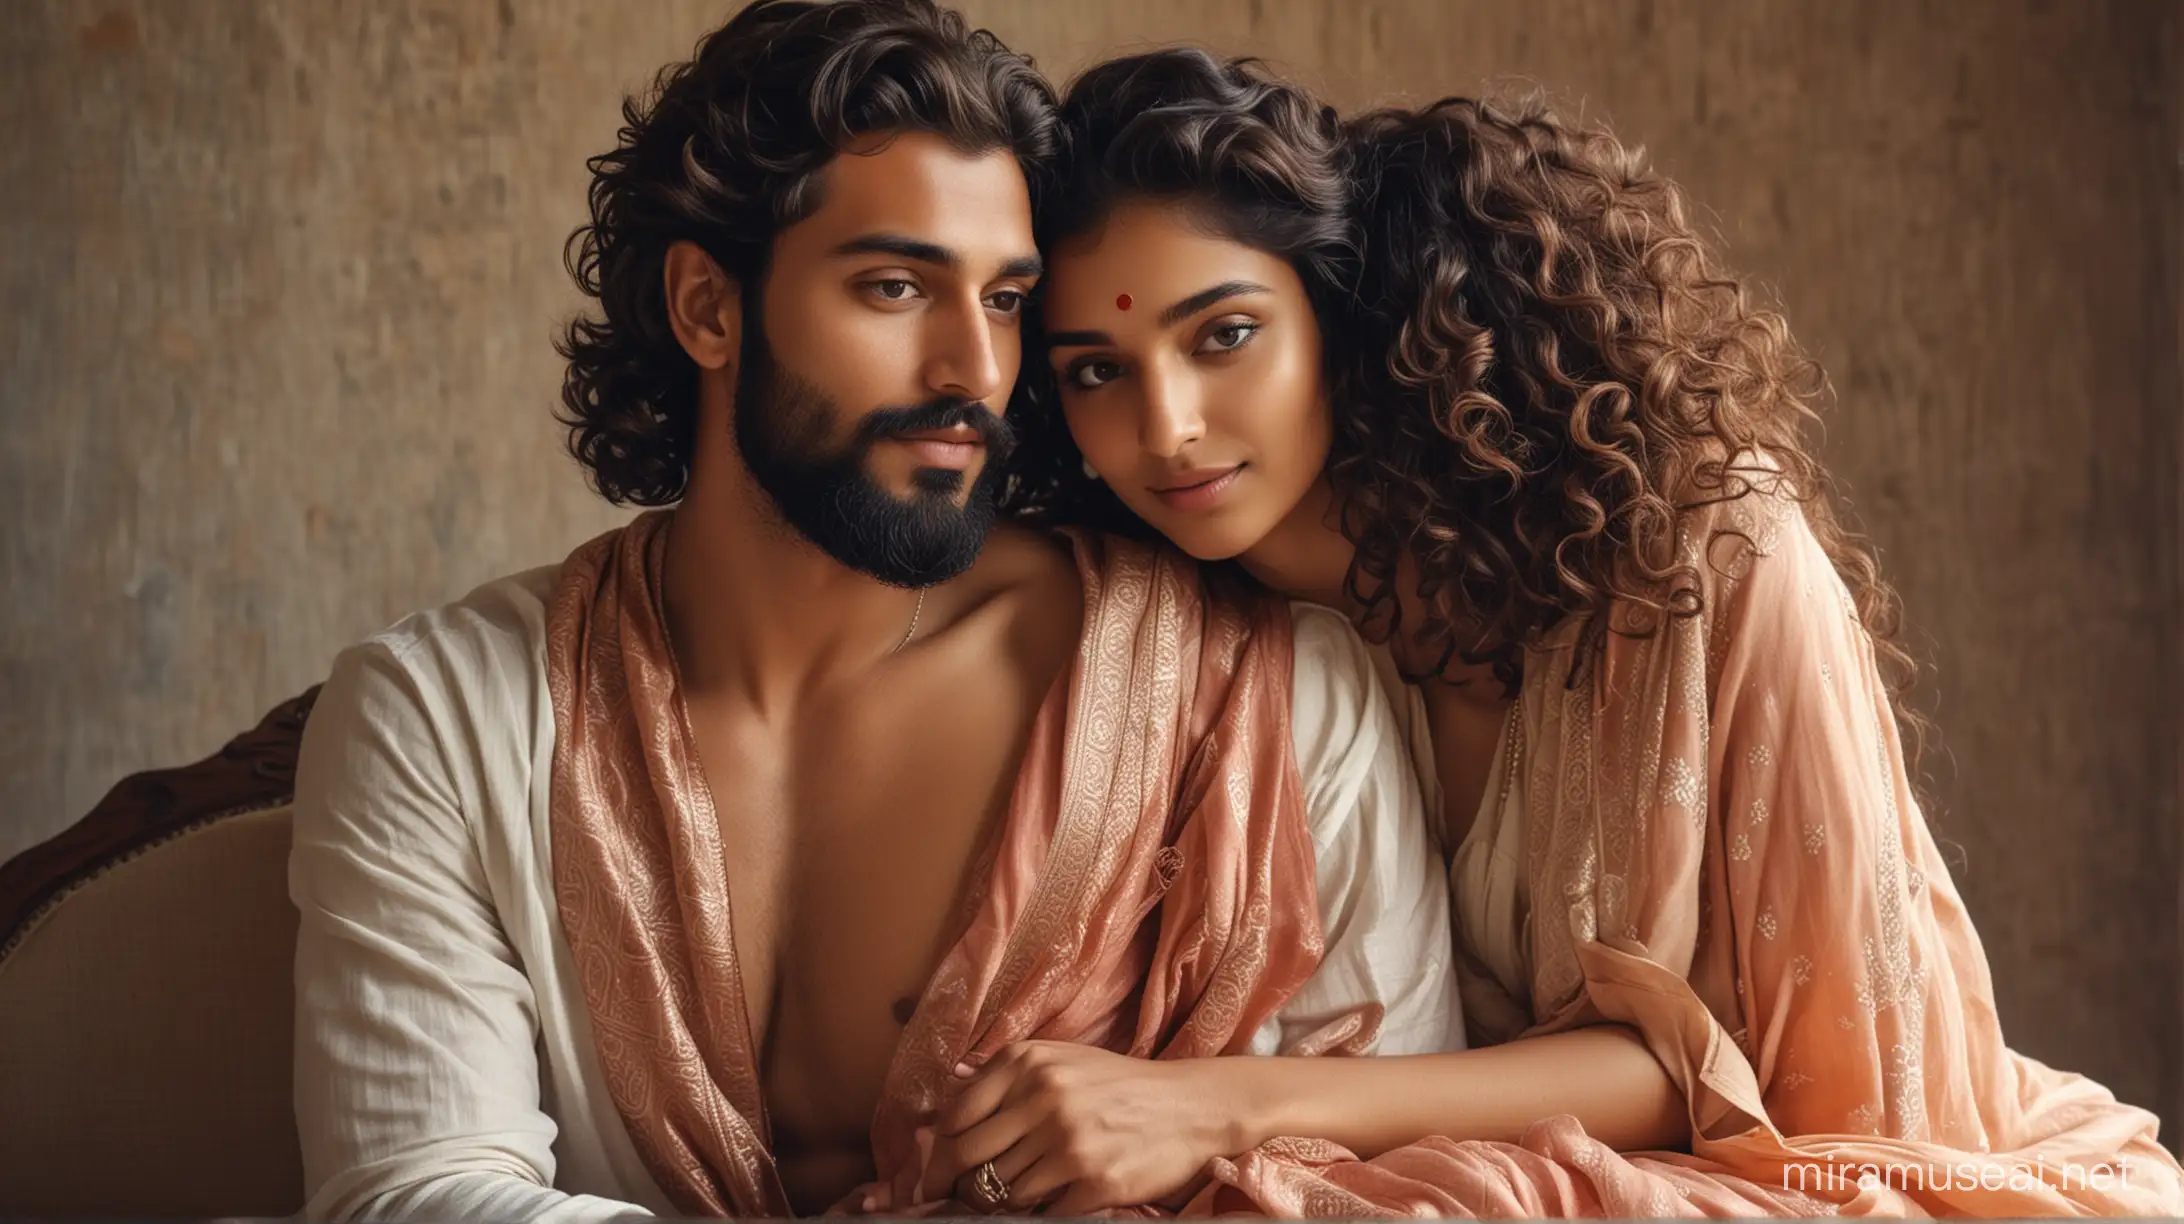 two intimate lovers, european handsome mAn, most handsome european man with indian features, fashionable beard, most beautiful indian girl, elegant saree look, curly long hair, girl siting on lap of man. man holding girl intimately with love, girl  topless, innocent and shy,
photo realistic, 4k